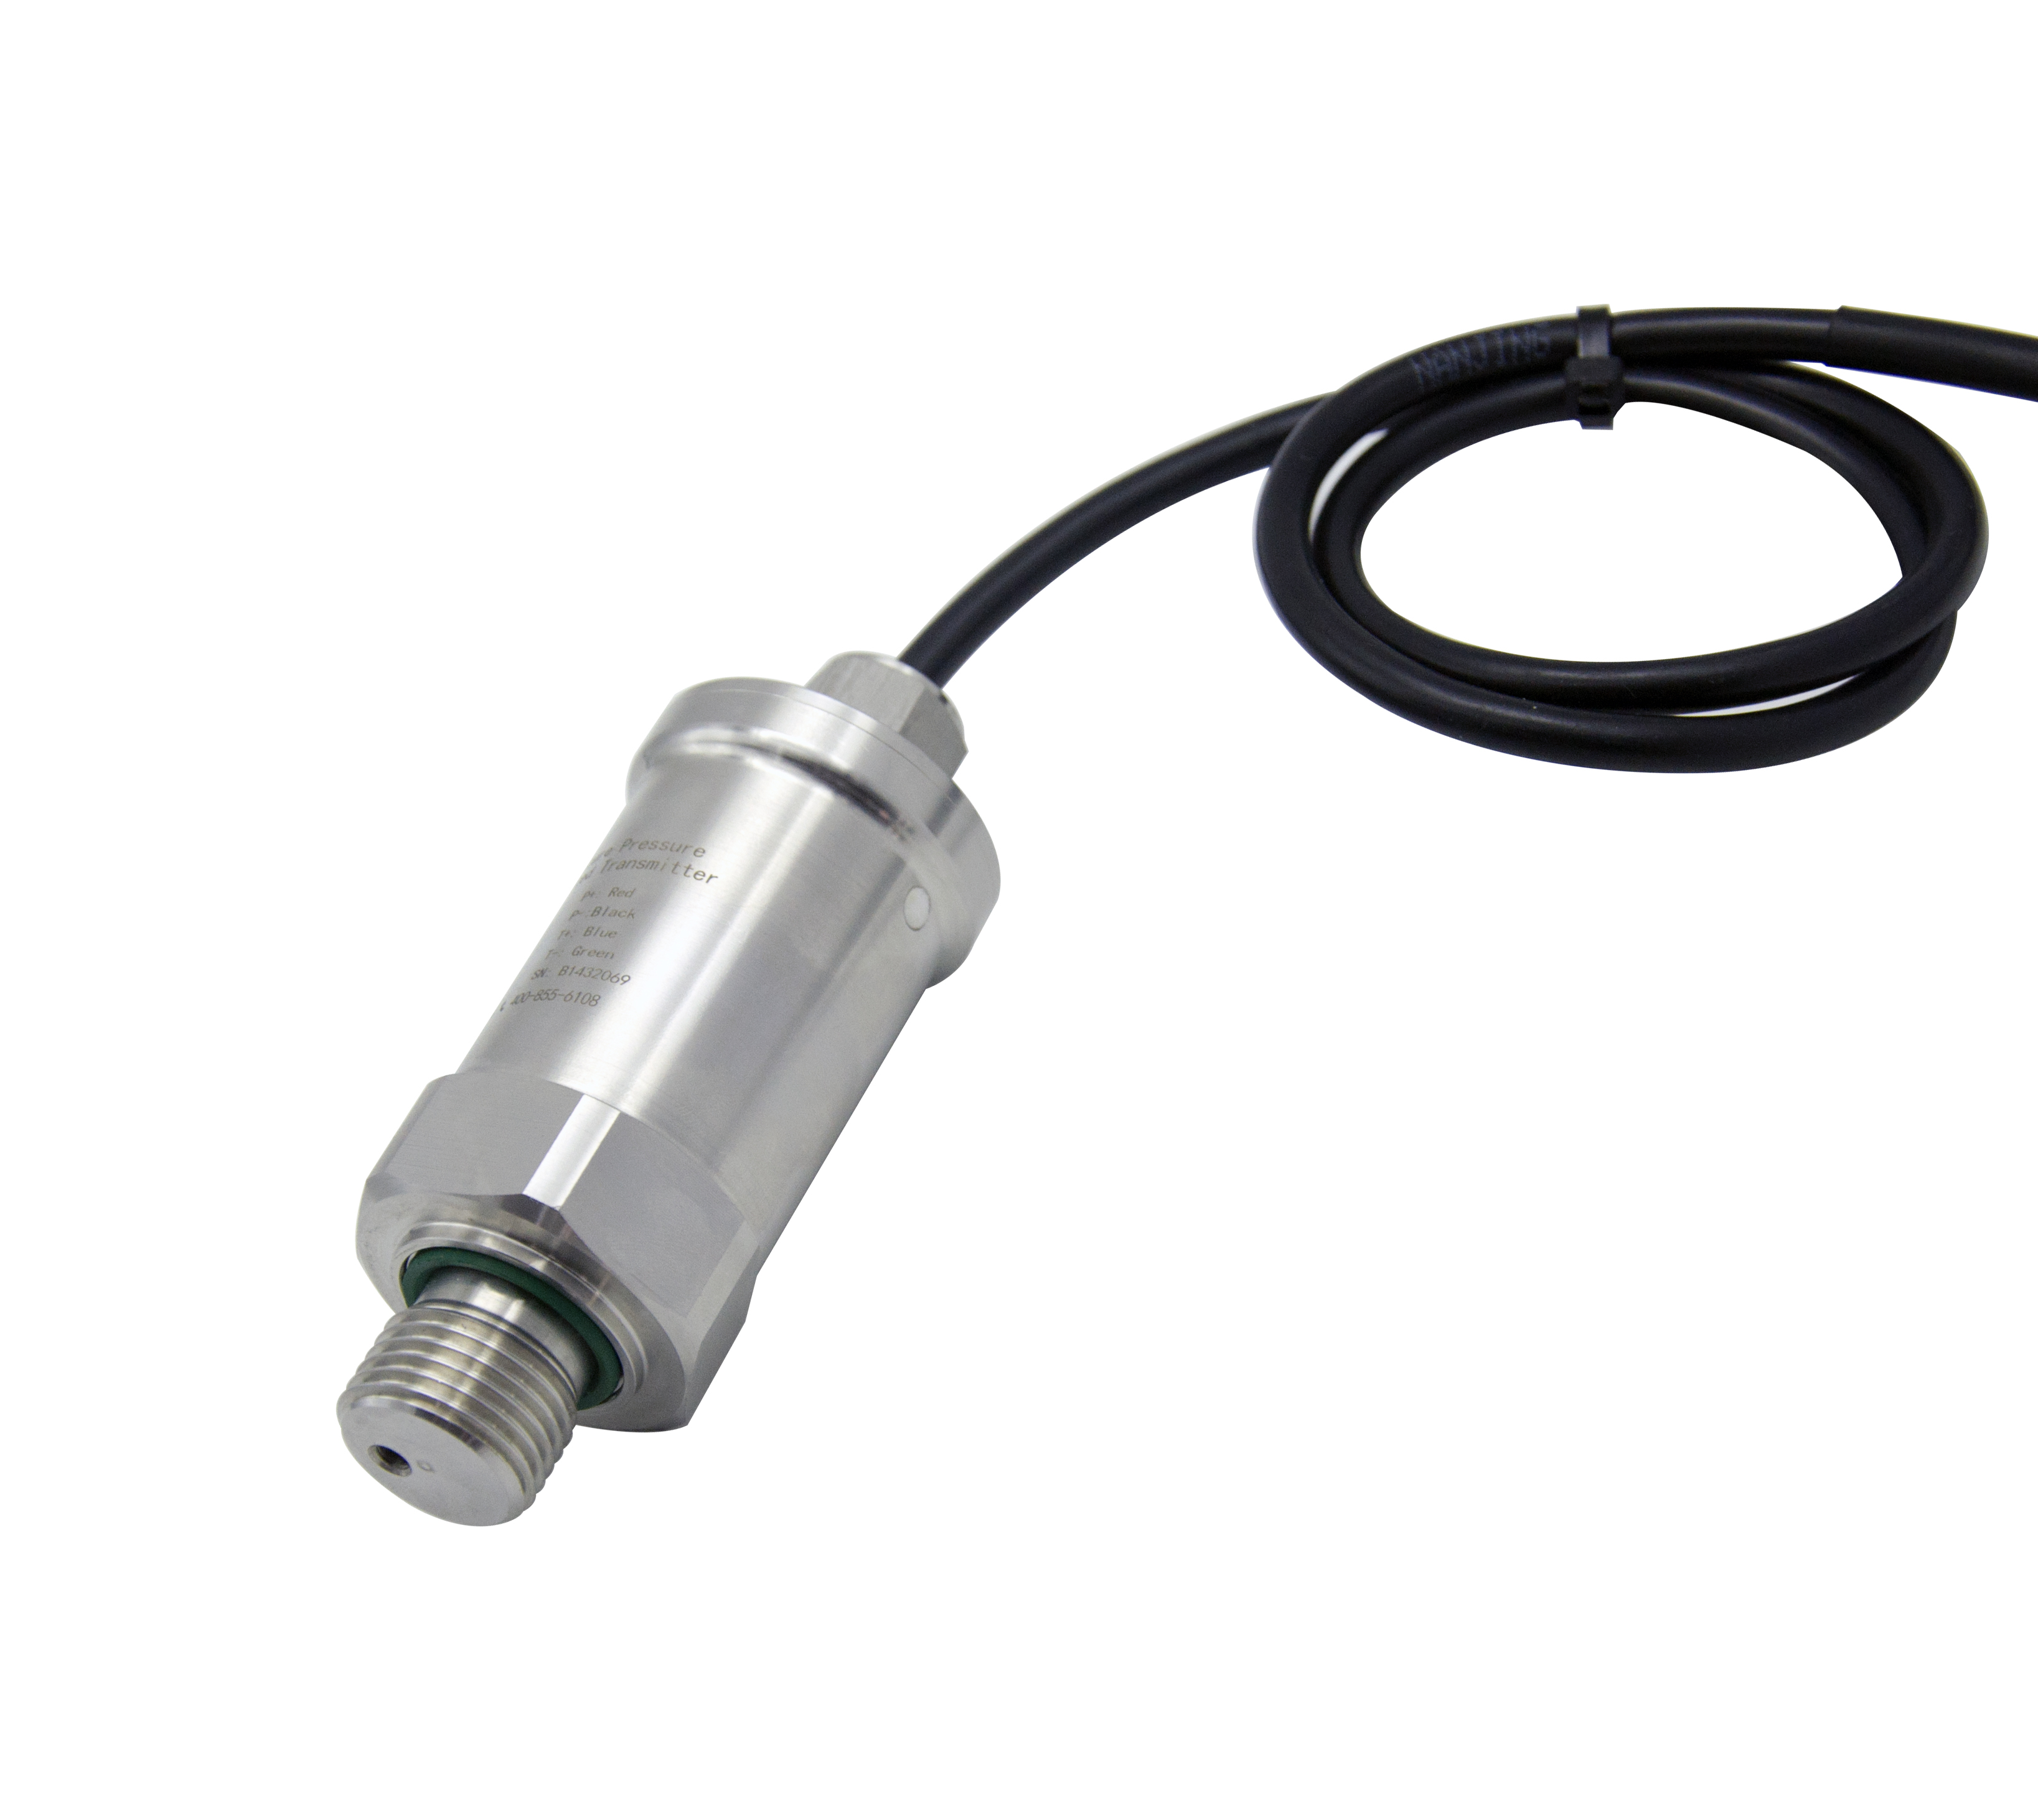 HPTM180 Temperature and Pressure integrated Transmitter